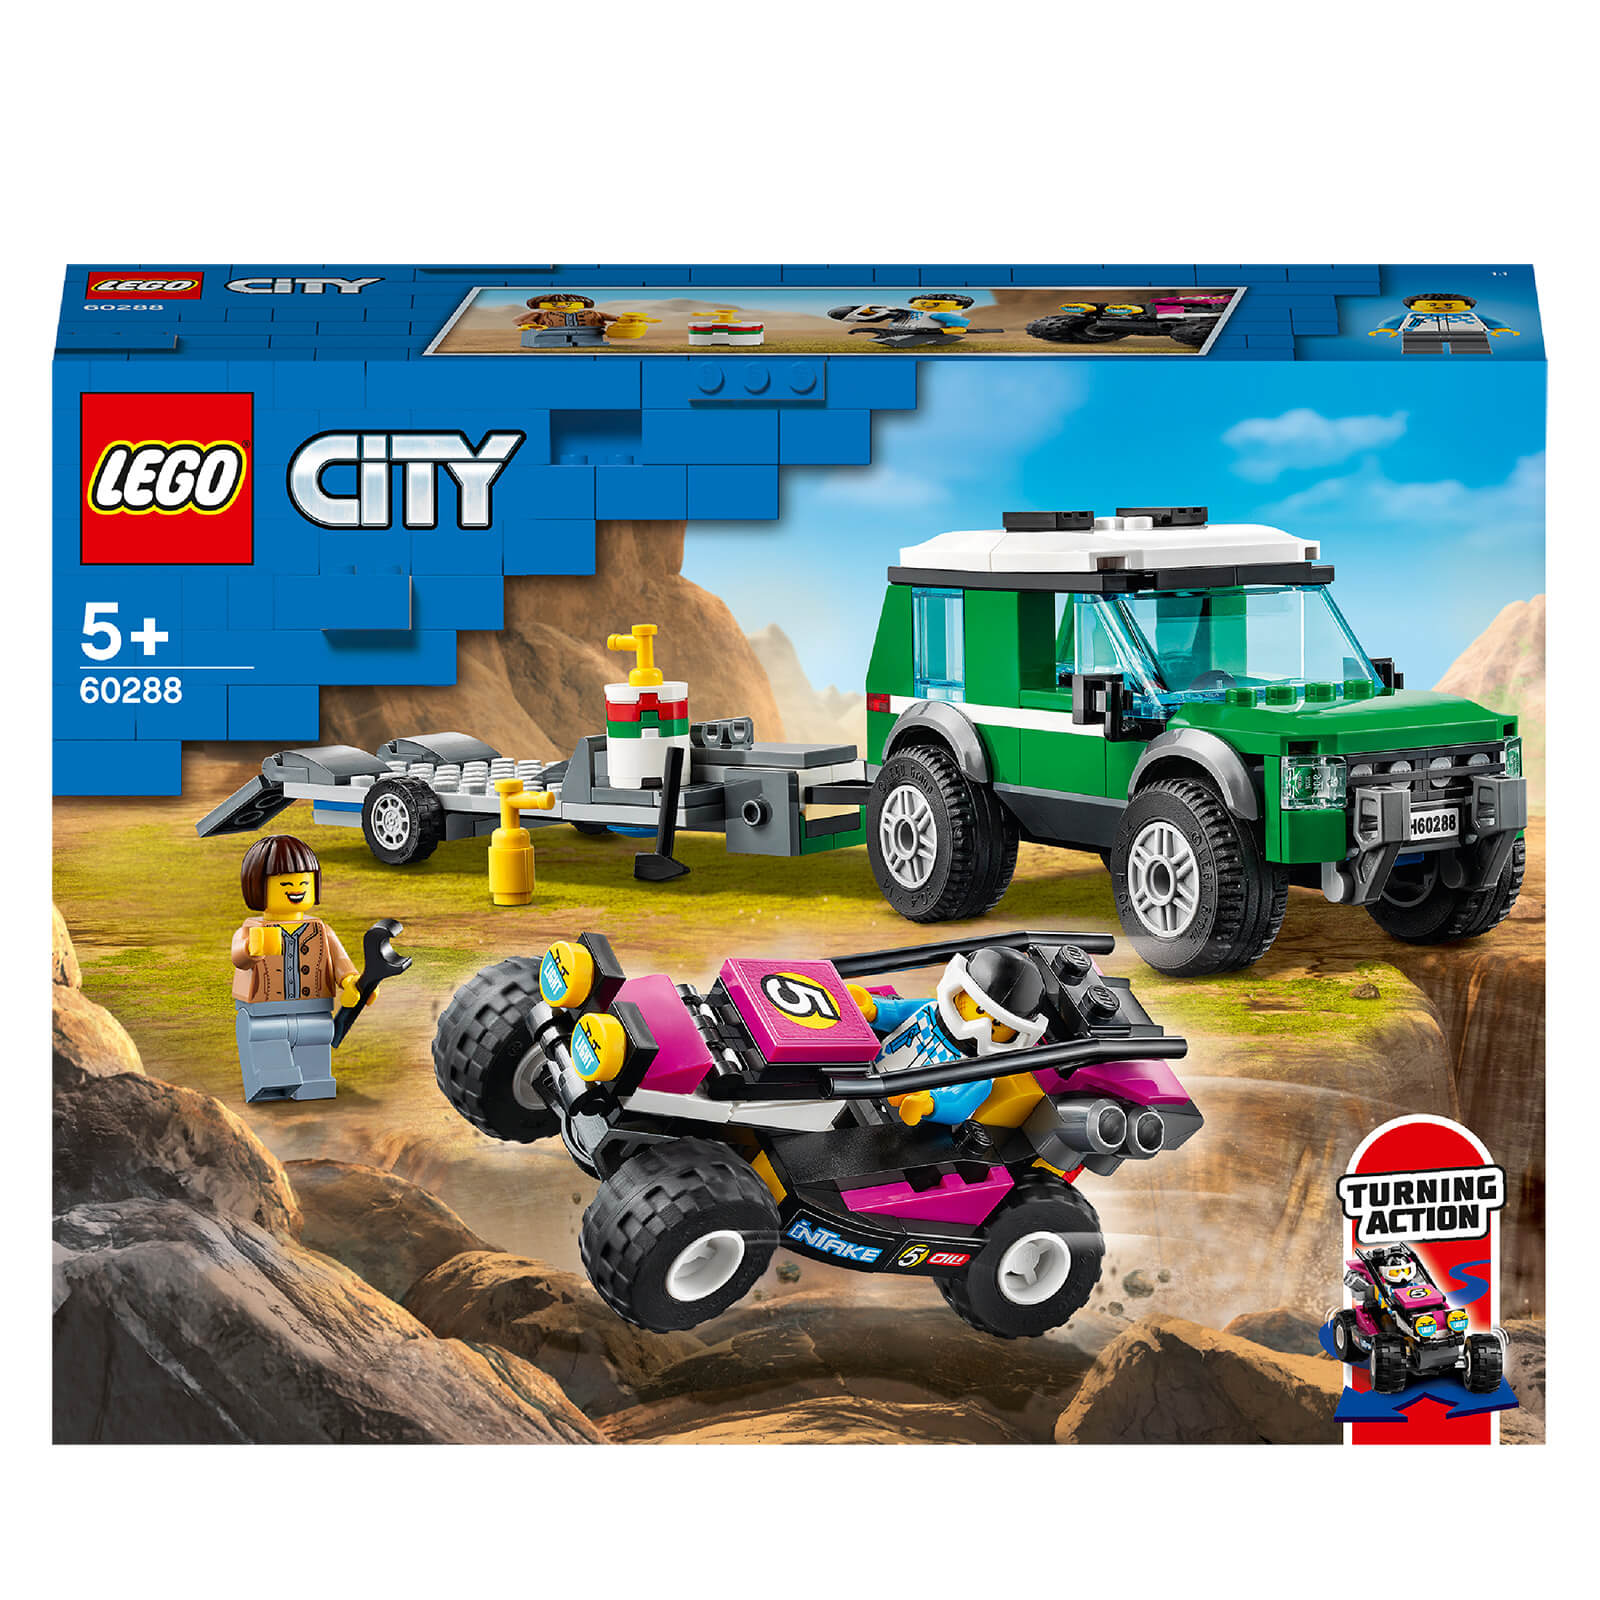 LEGO City: Great Vehicles Race Buggy Transporter Toy (60288)